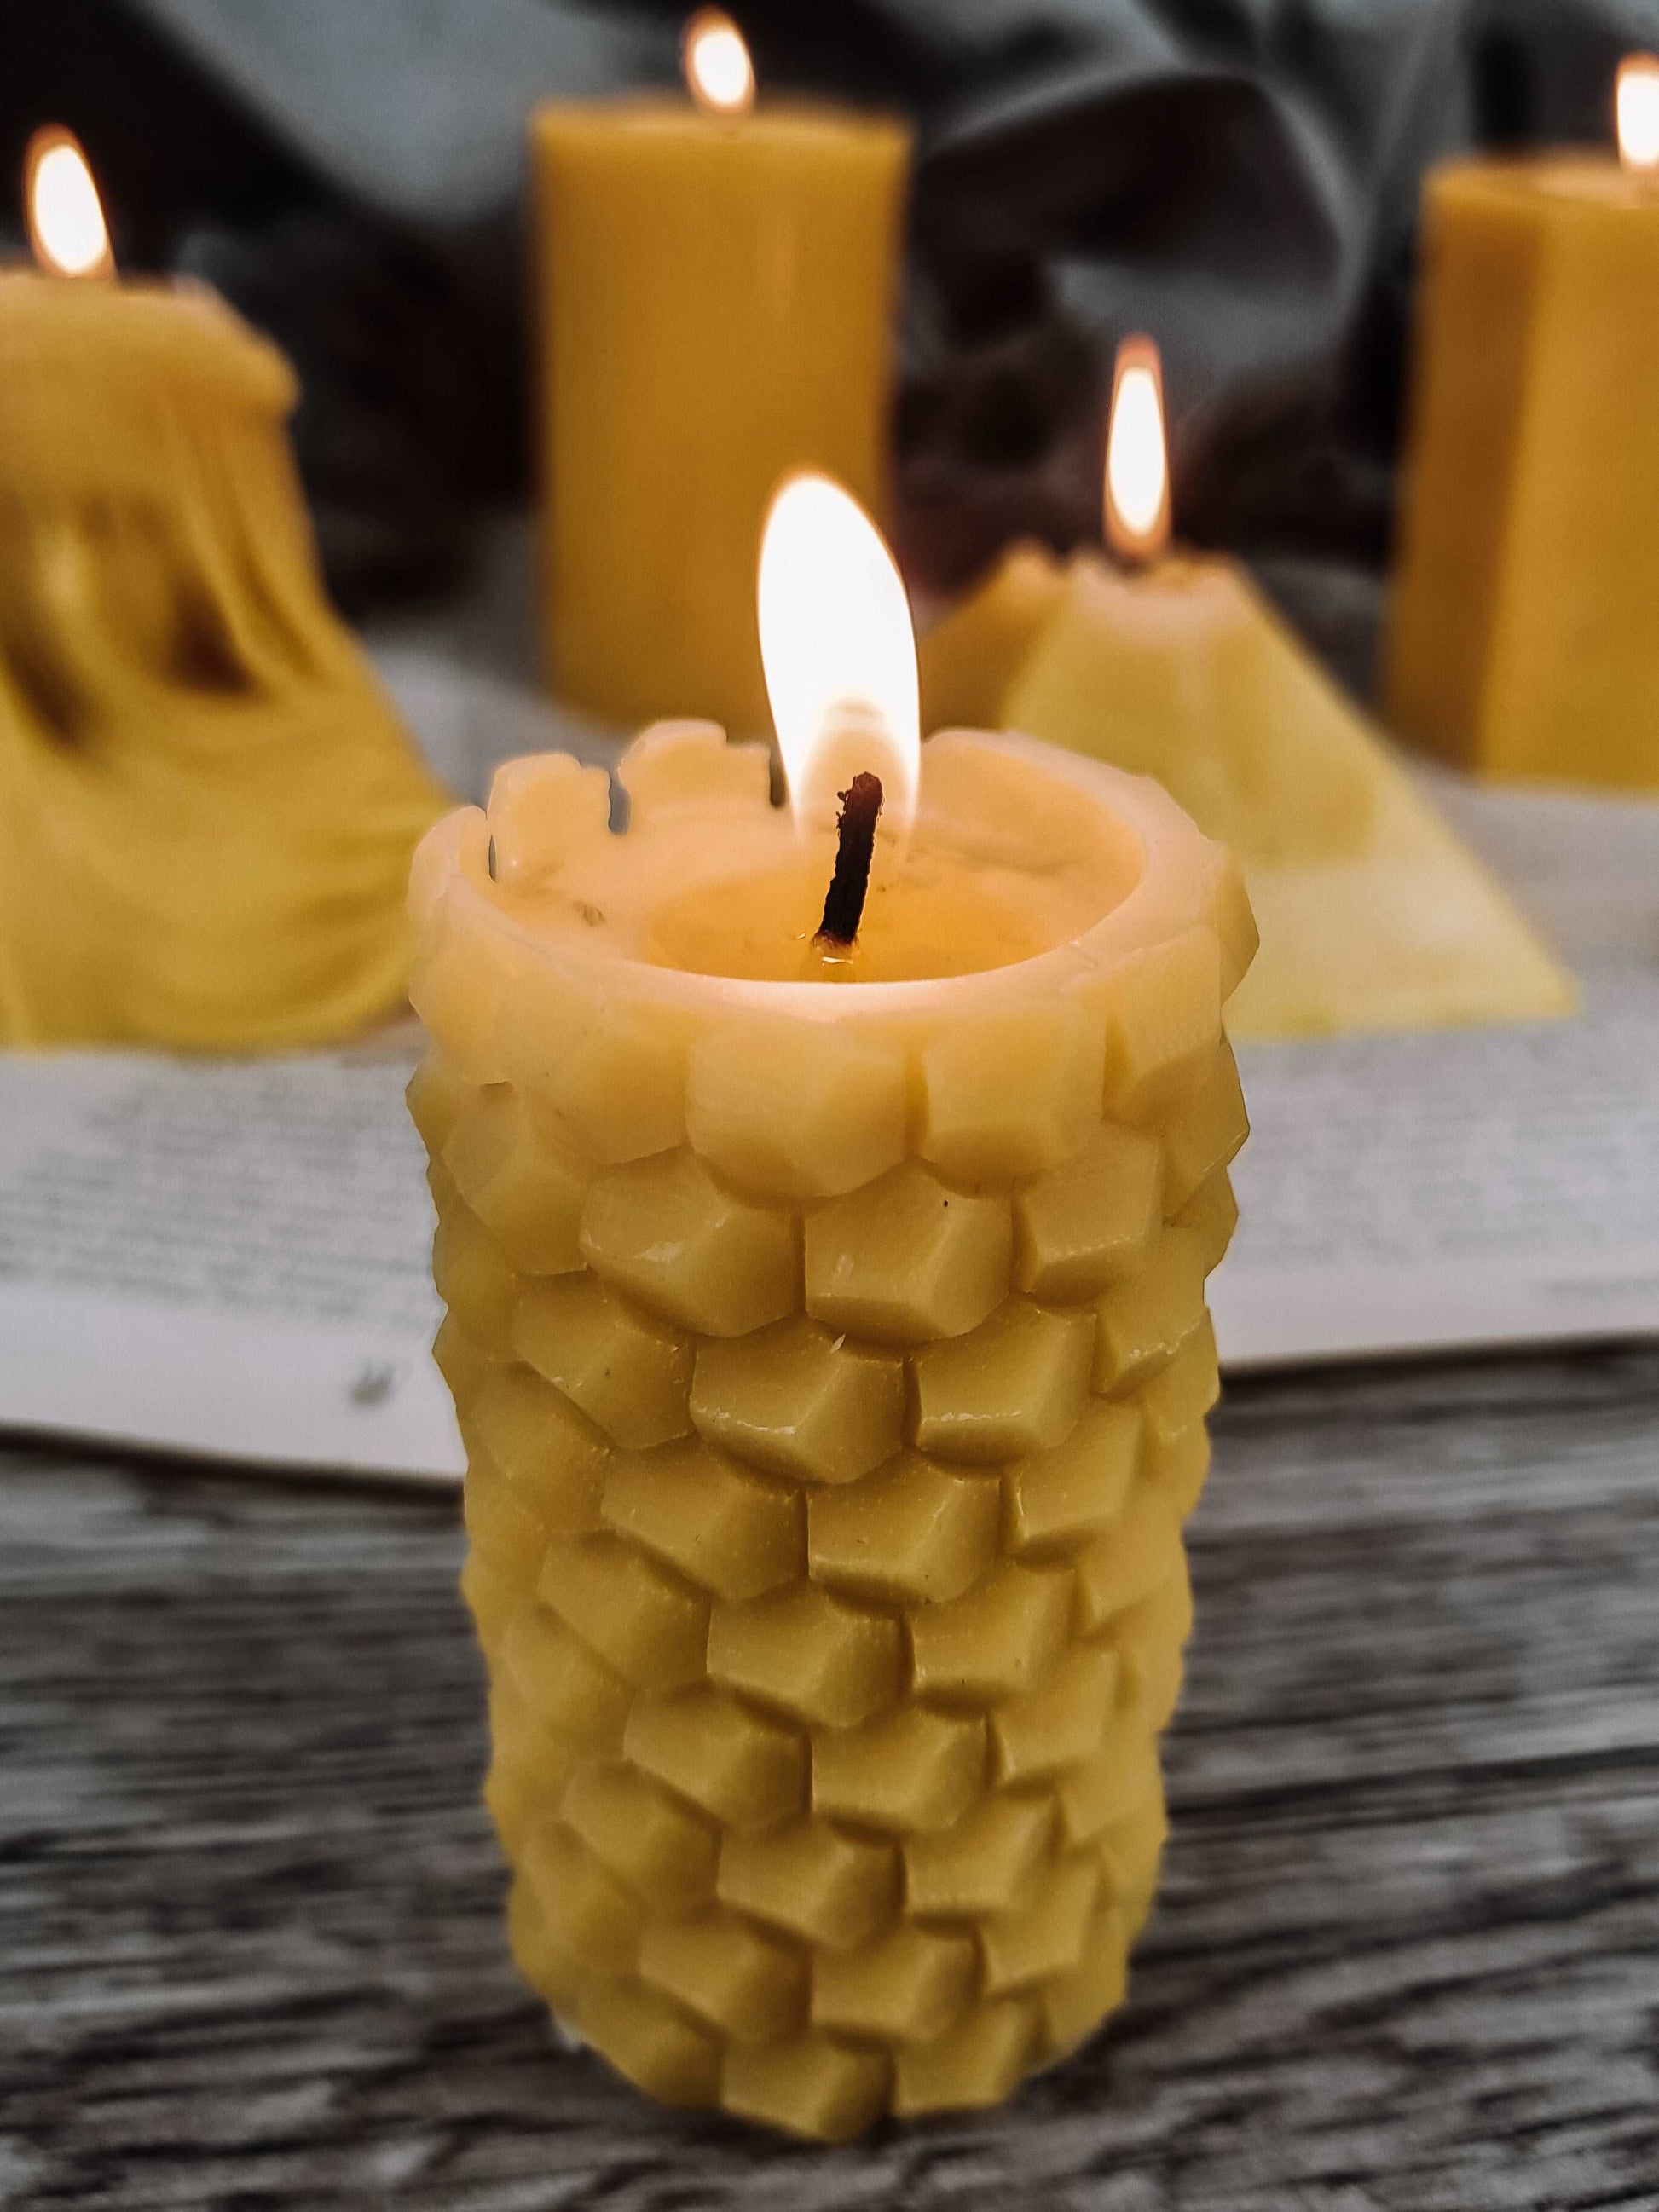 Honeycomb Solid Pure Beeswax Candle, Honey Bee, bee hive candles, Decorative Candles, autumn decor